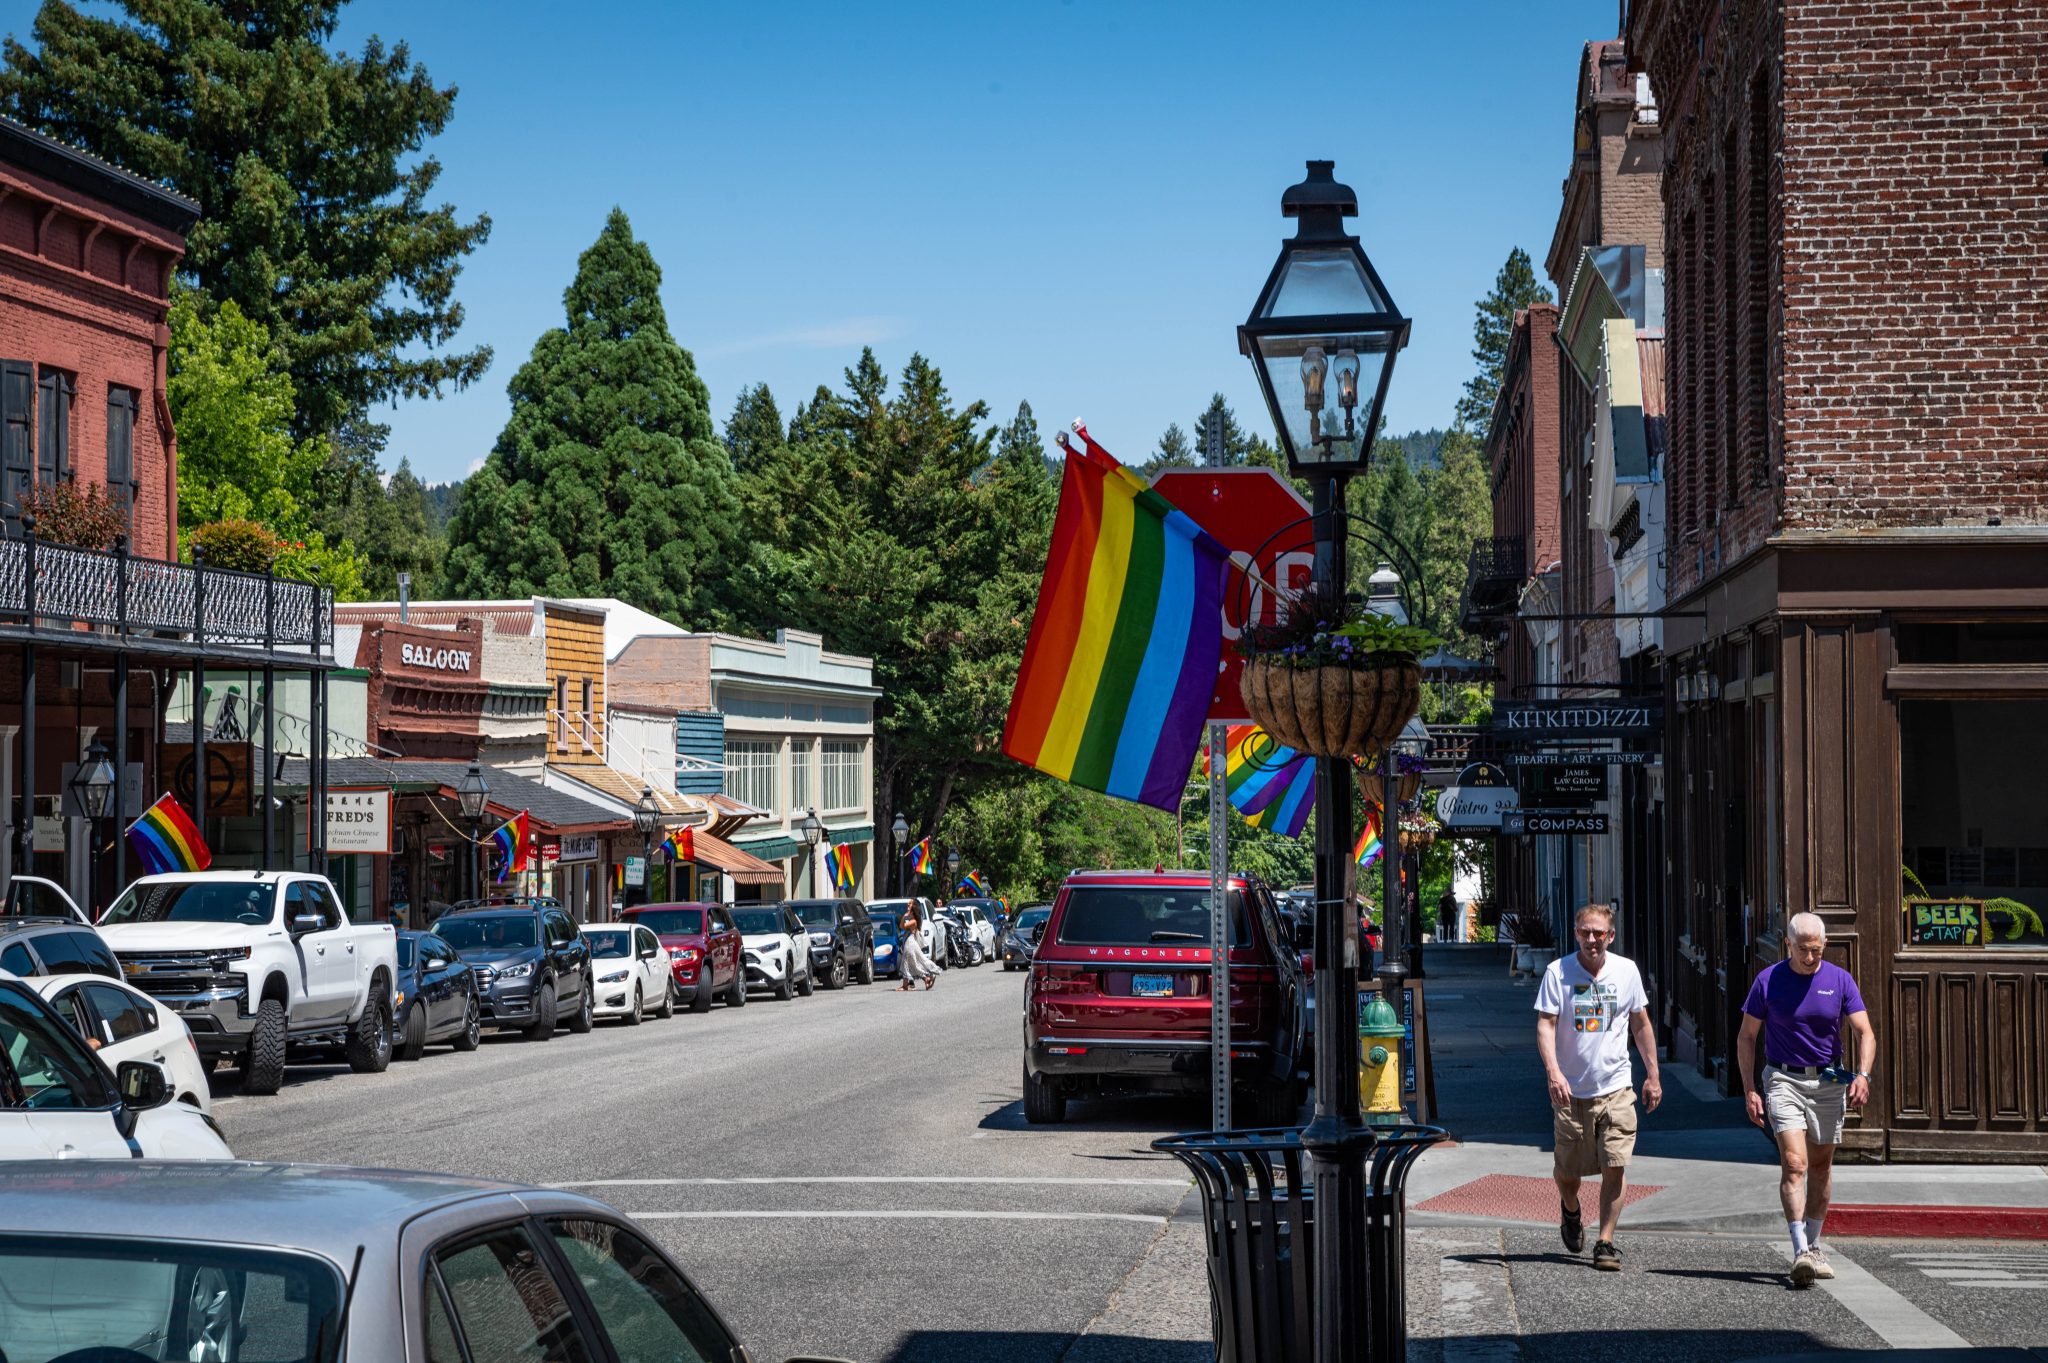 nevada county, rainbow flag, pride, lesbian, photojournalist, news article, california, photography, town, streets, decorated, first pride